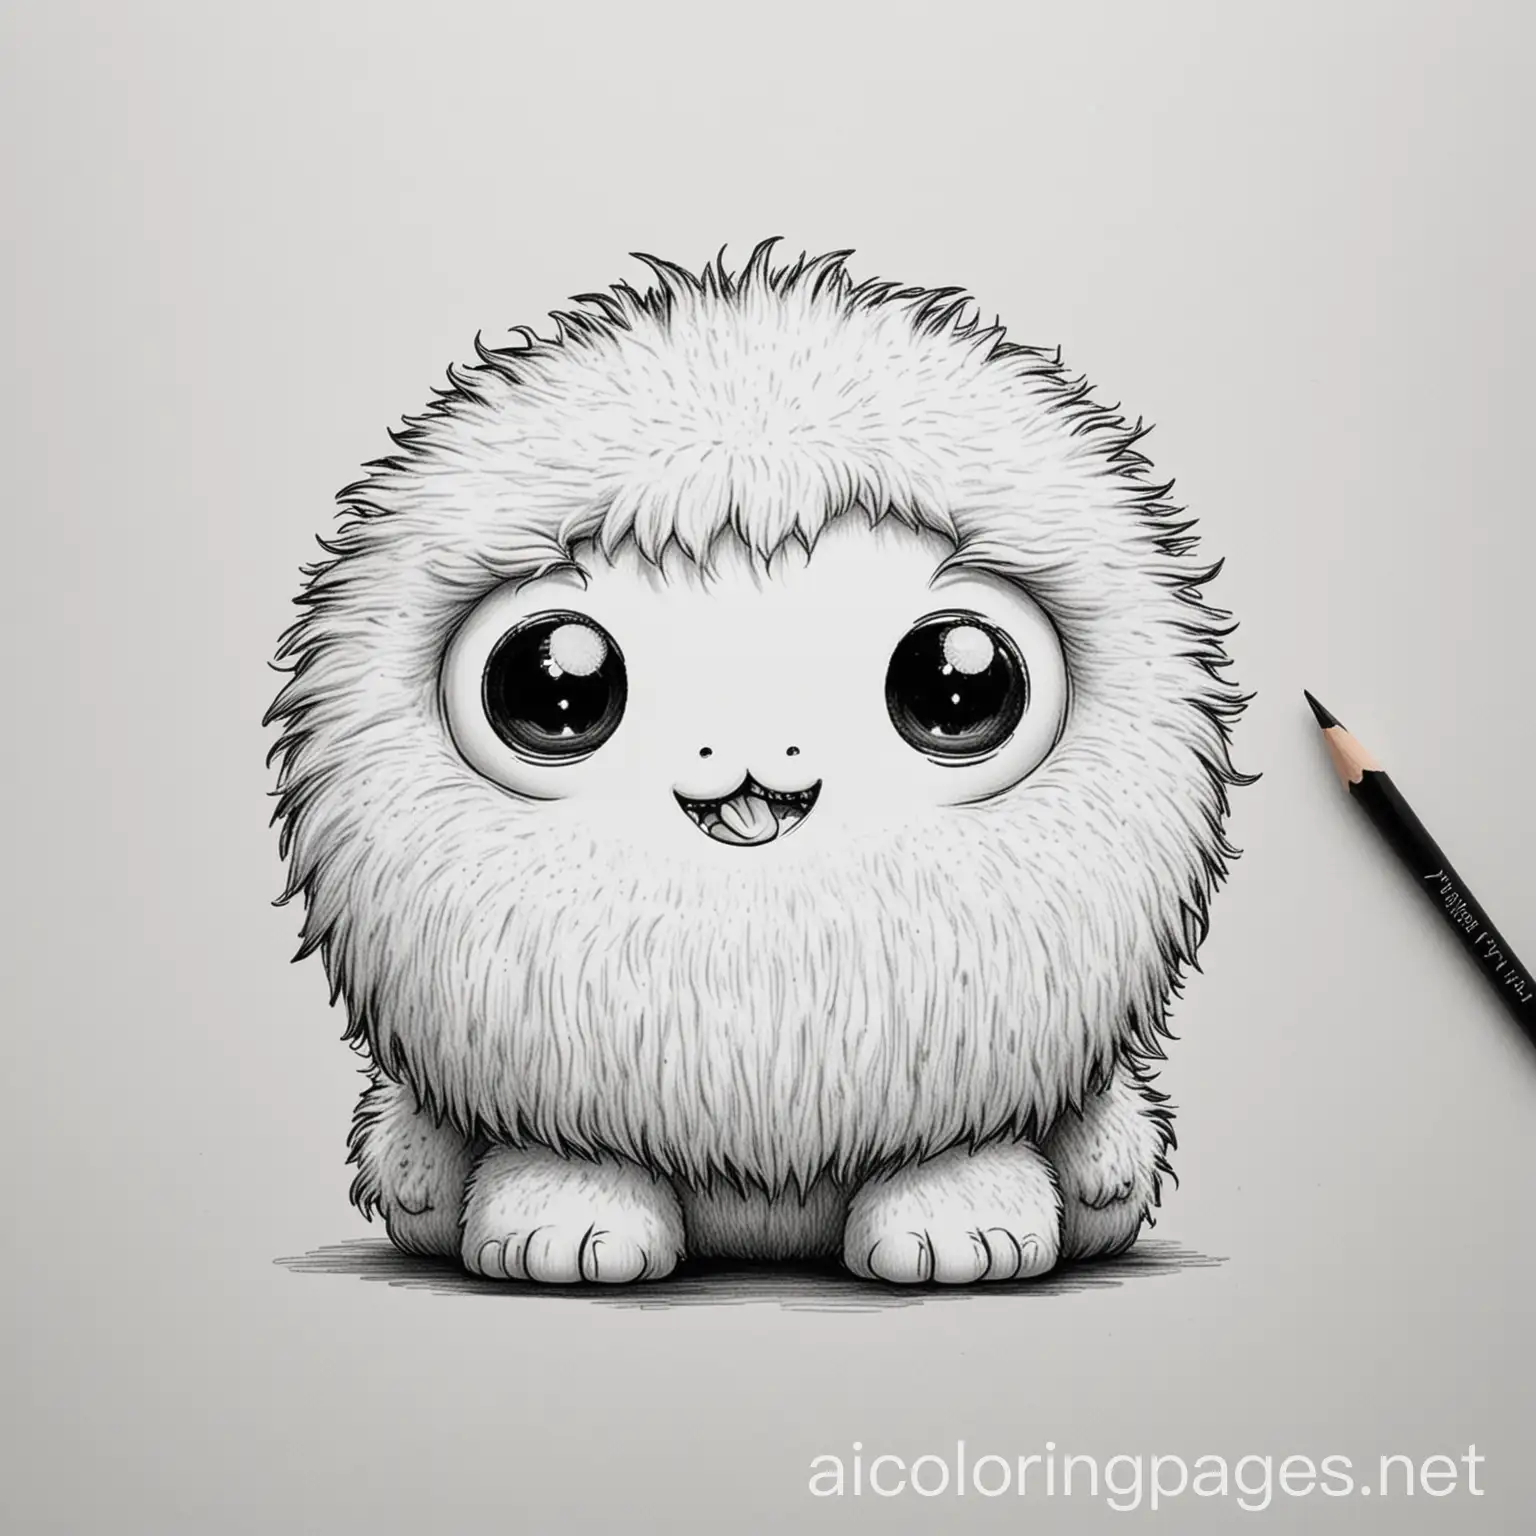 Cute-Fuzzy-Monster-Coloring-Page-with-Big-Eyes-and-Floppy-Ears